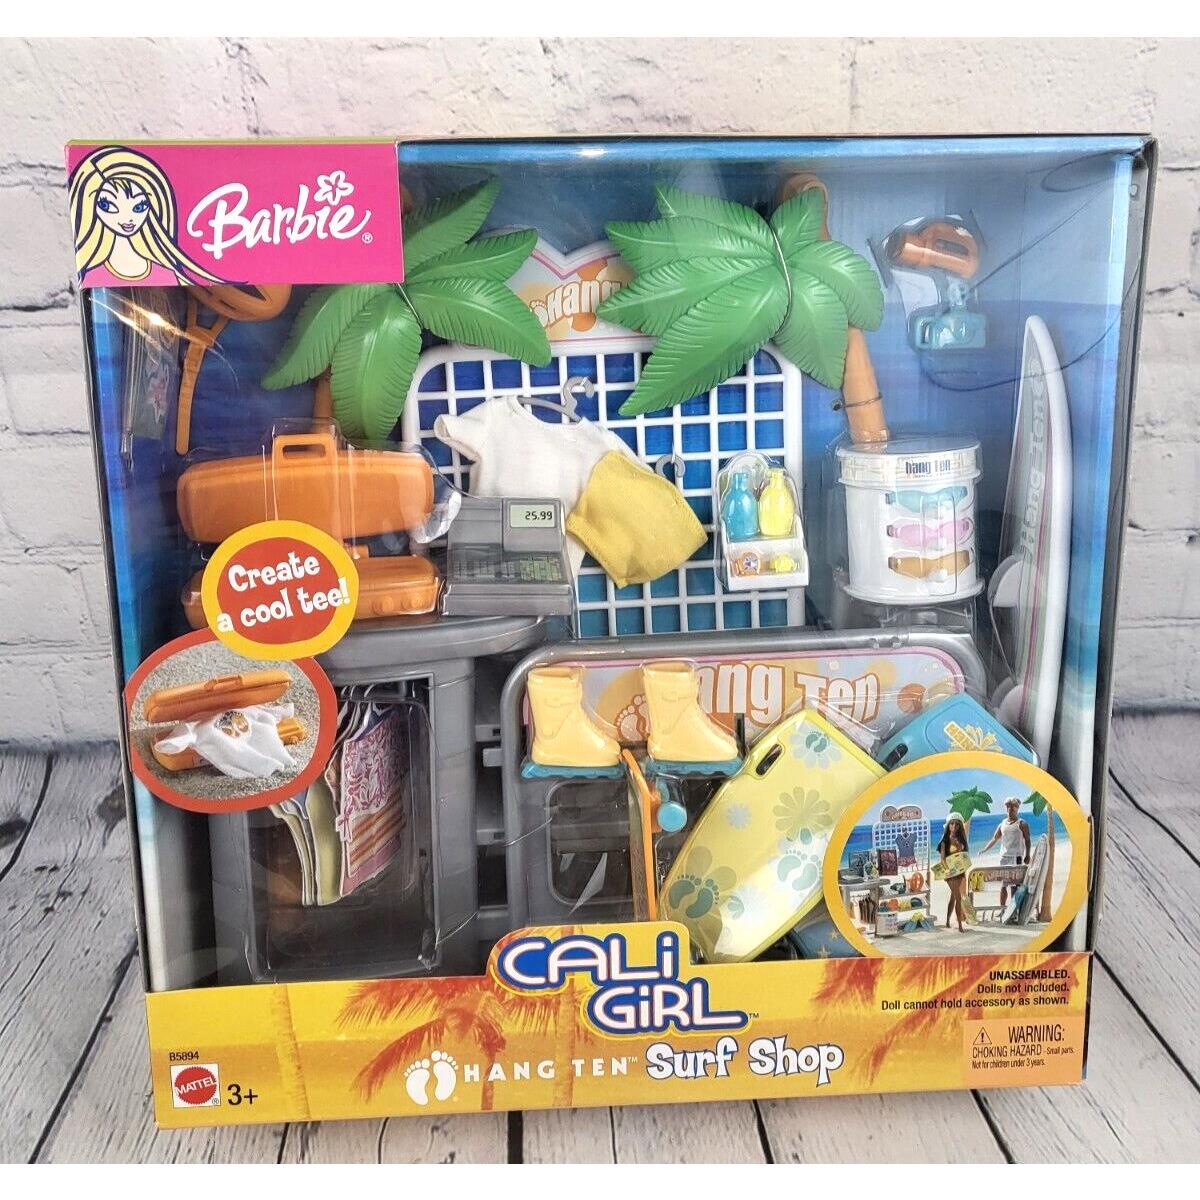 Barbie Hang Ten Cali Girl Surf Shop Playset and Accessories 2003